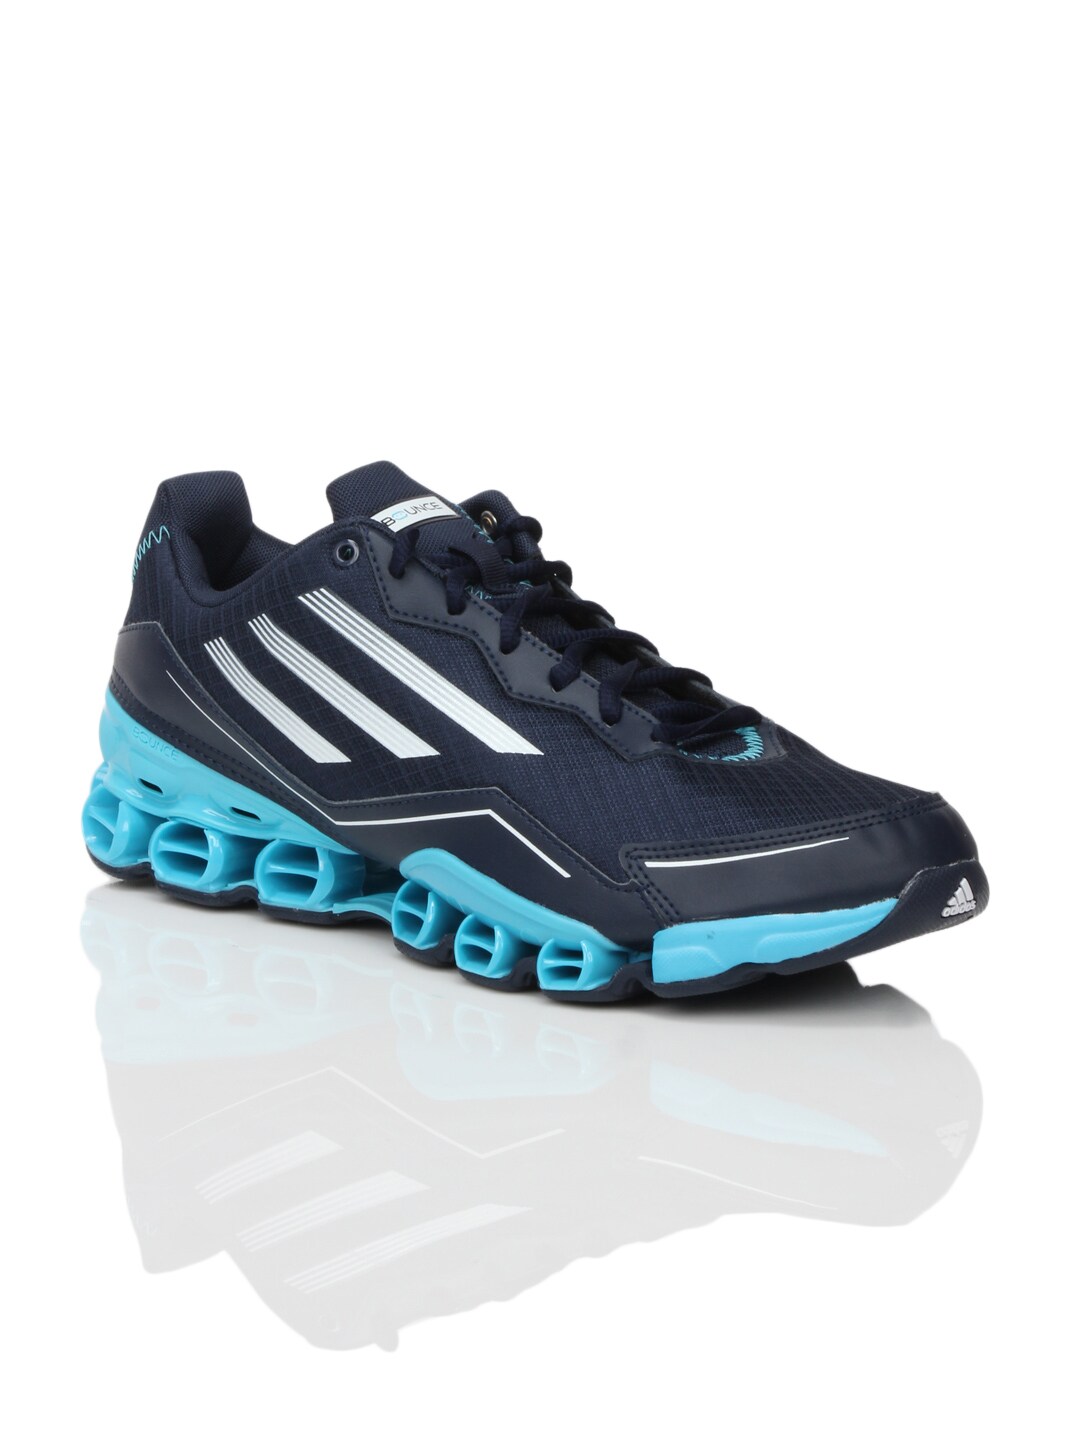 ADIDAS Men Bounce Trainer Navy Blue Sports Shoes